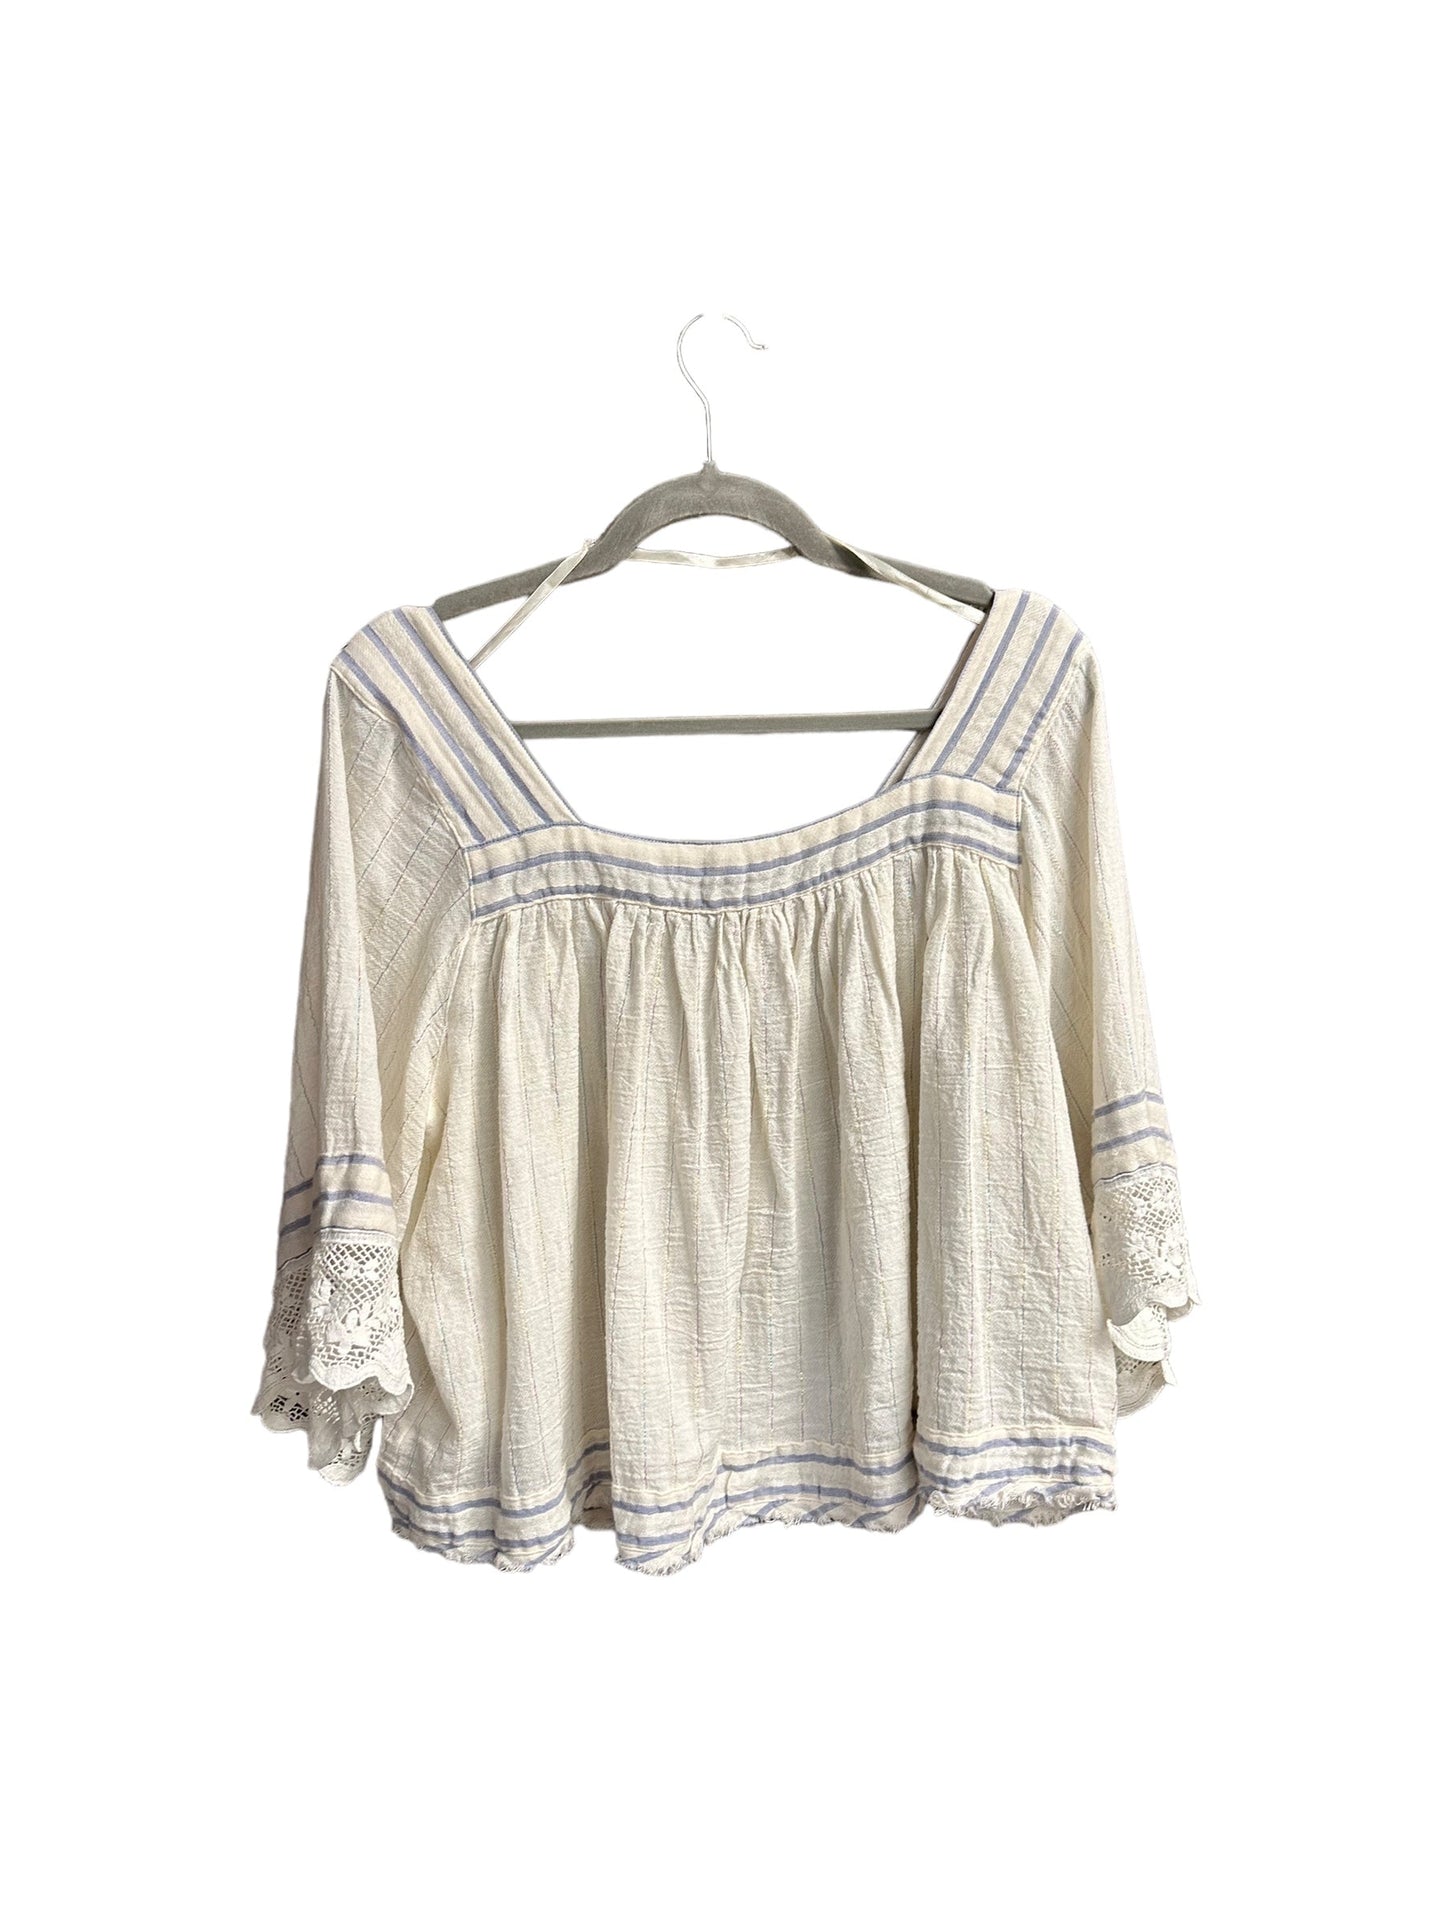 Blue & Cream Top Short Sleeve Free People, Size M